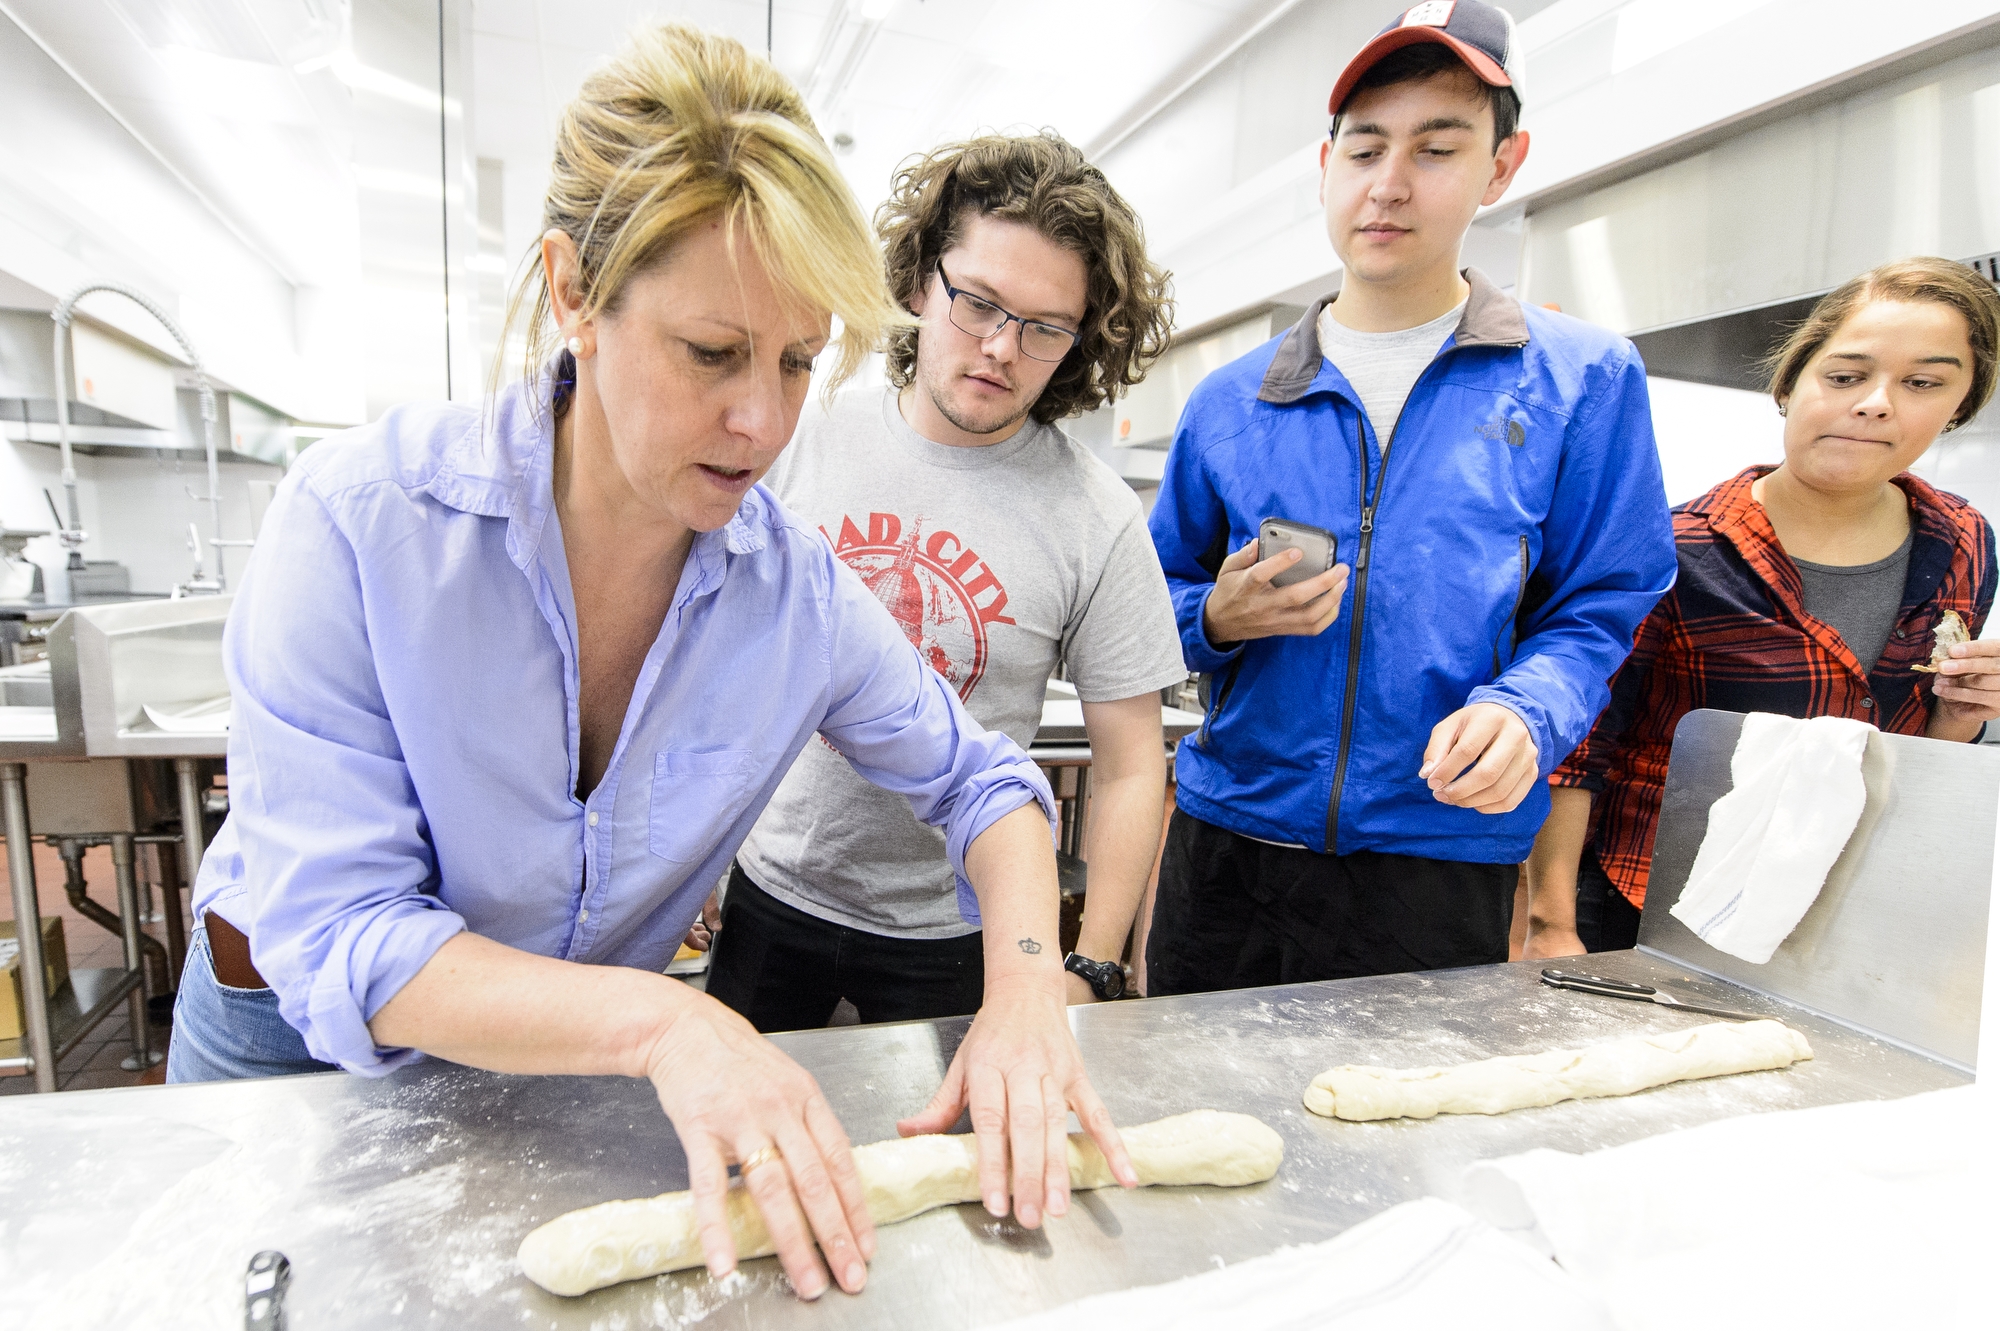 Michelle Clasen (left), of Clasen's Bakery, demonstrates how to roll bread dough to students during a Fermented Food and Beverage class taught by Nick Smith.